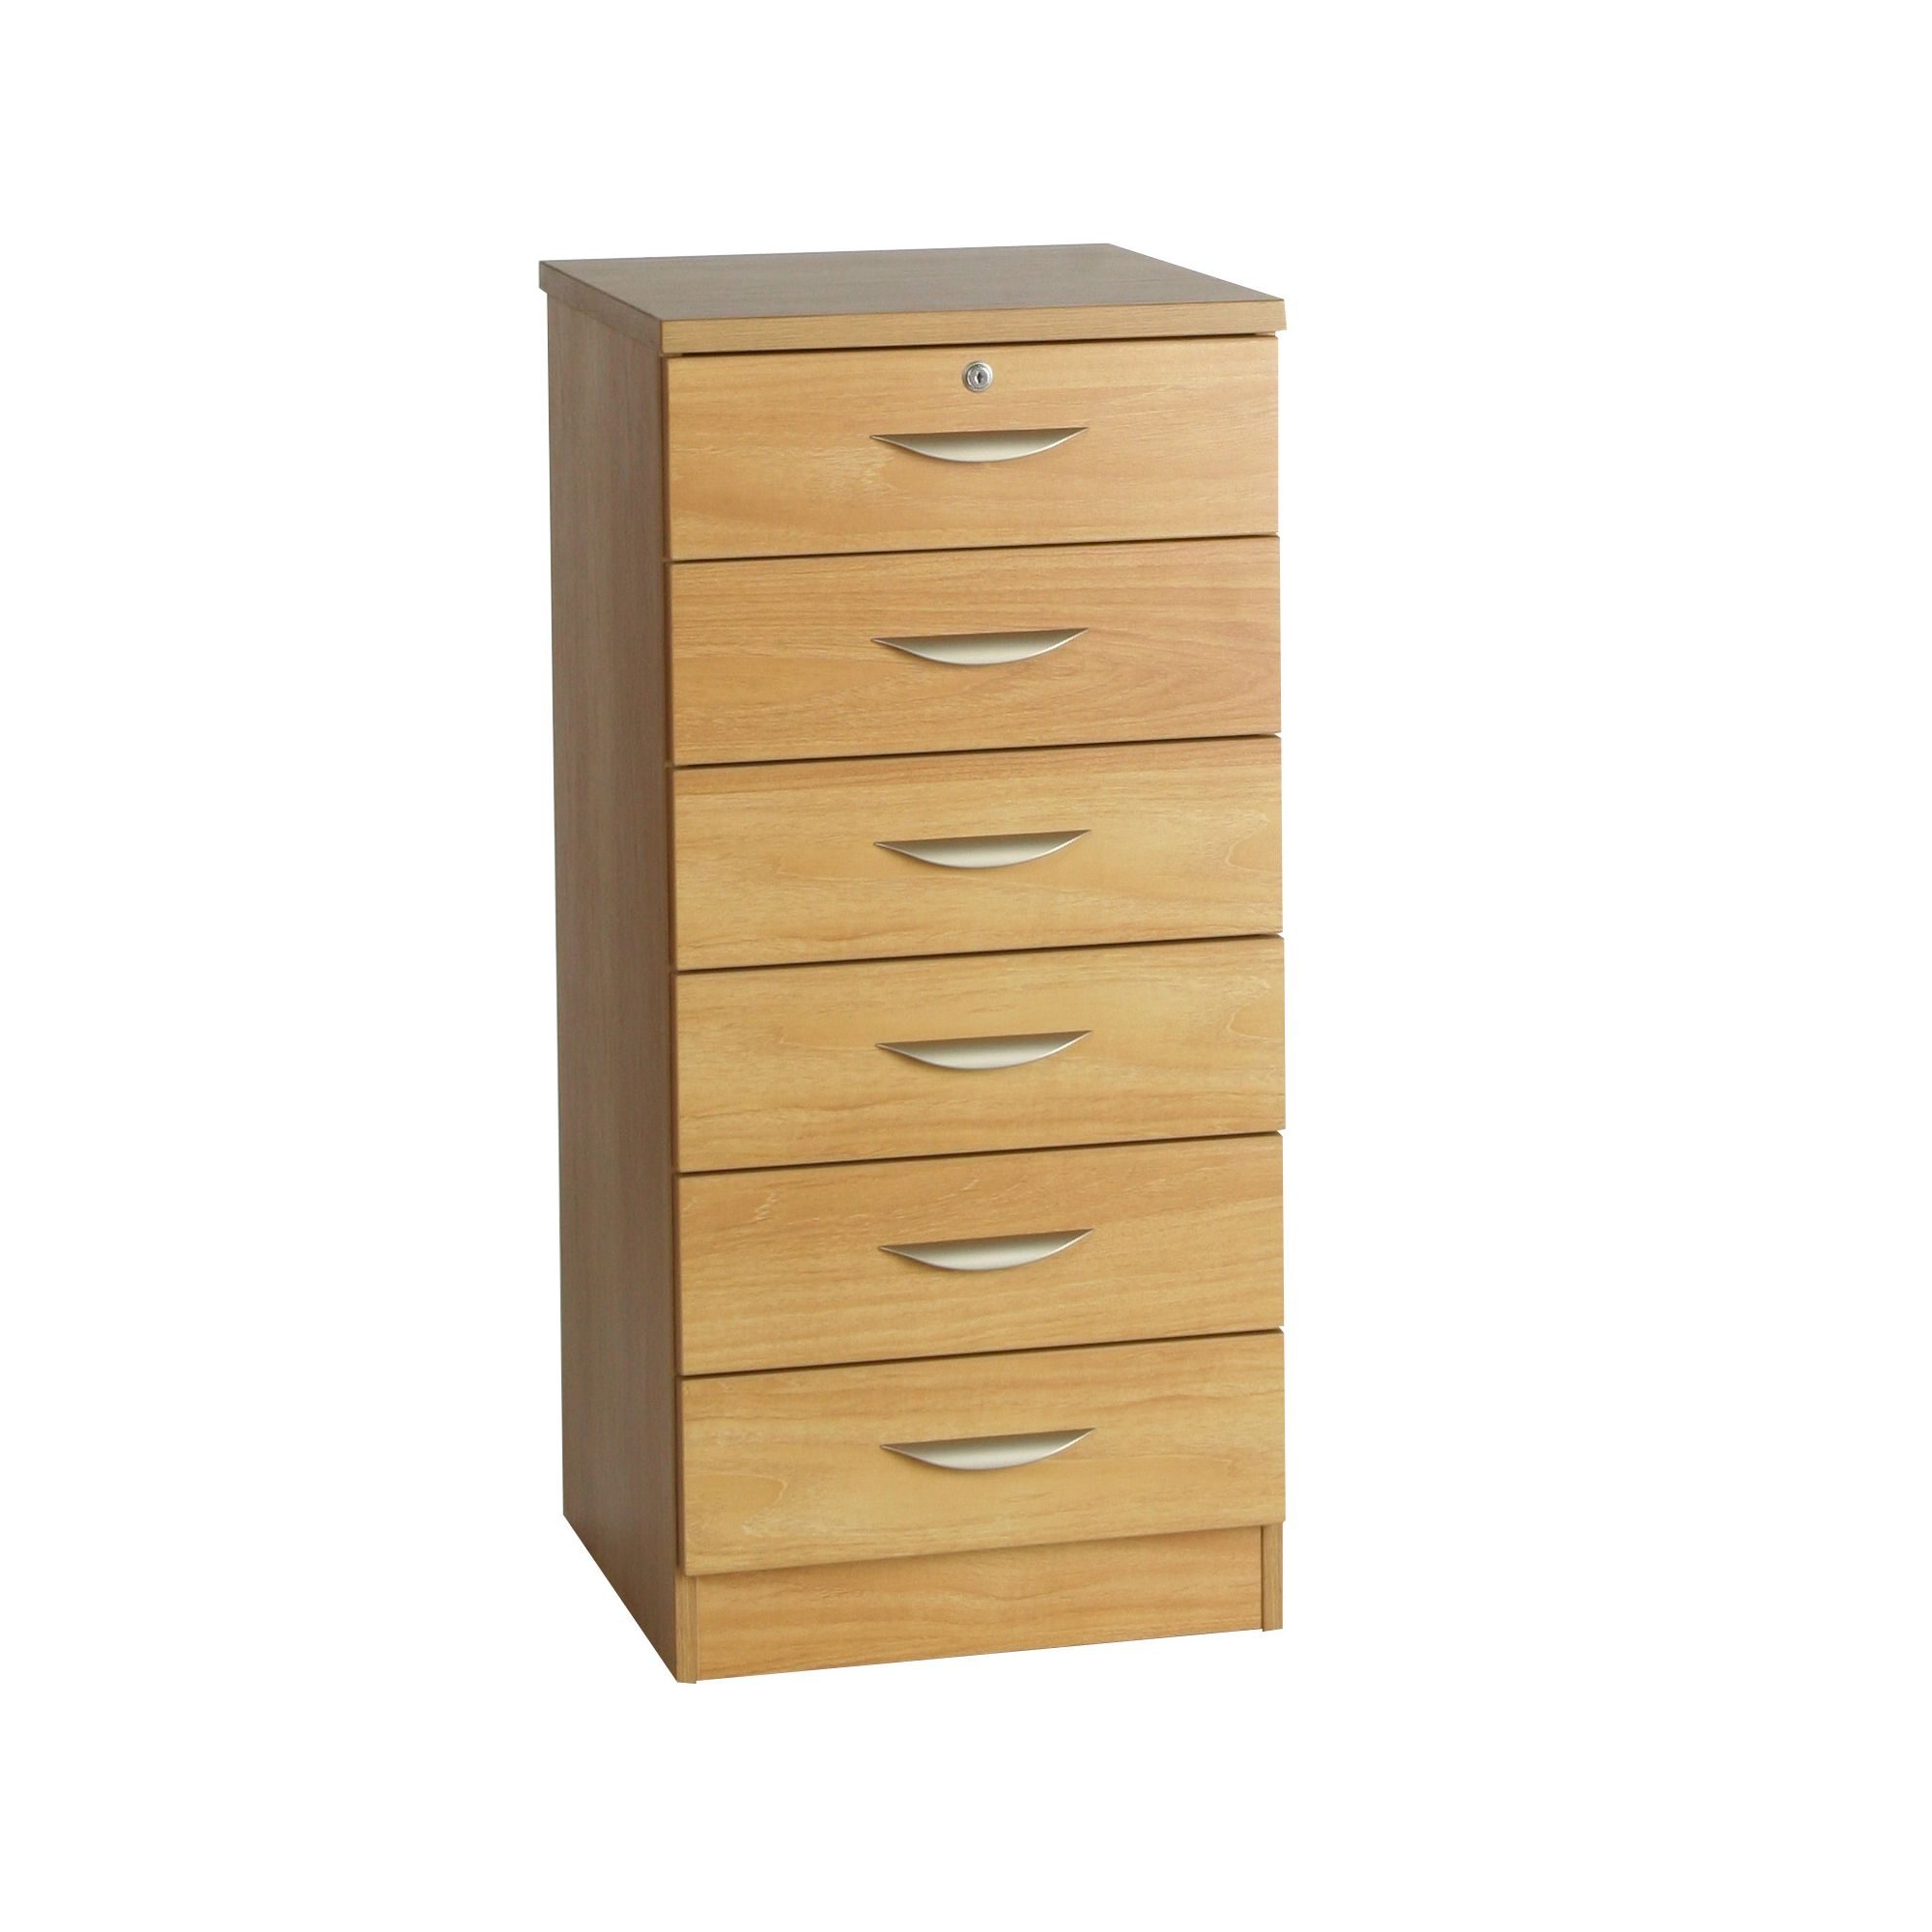 R White Cabinets Six Drawer Wooden Home Office Unit - Beech at Tesco Direct